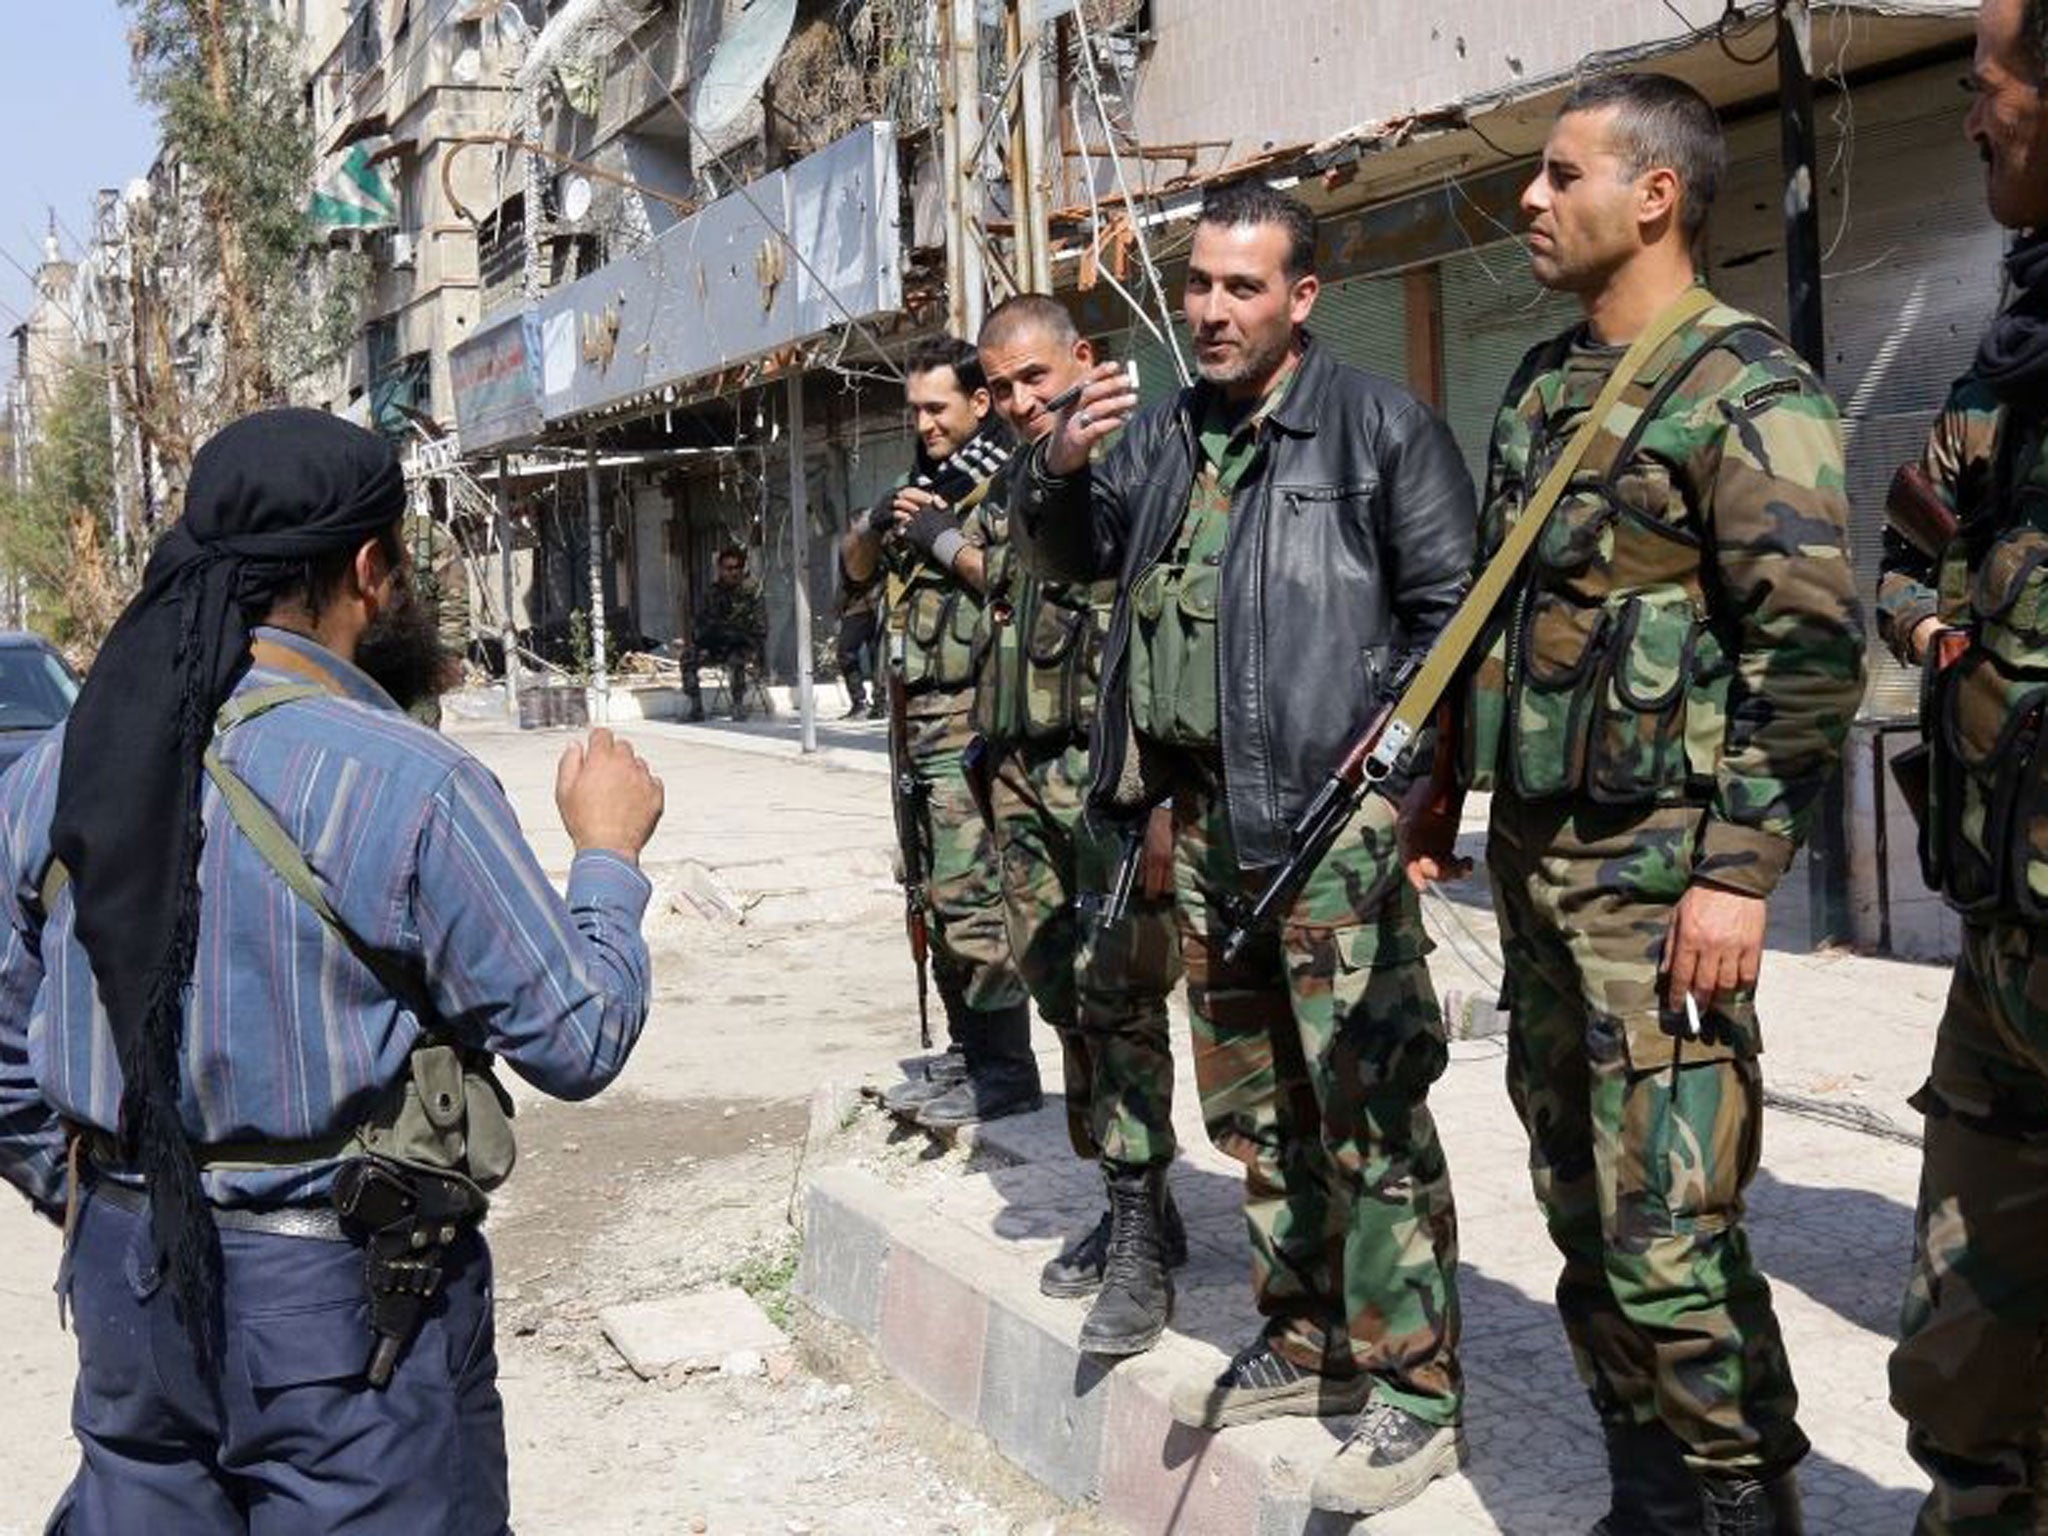 Time to talk: Pro-regime fighters speak to a rebel during a truce in Babbila, a Damascus suburb, earlier this month